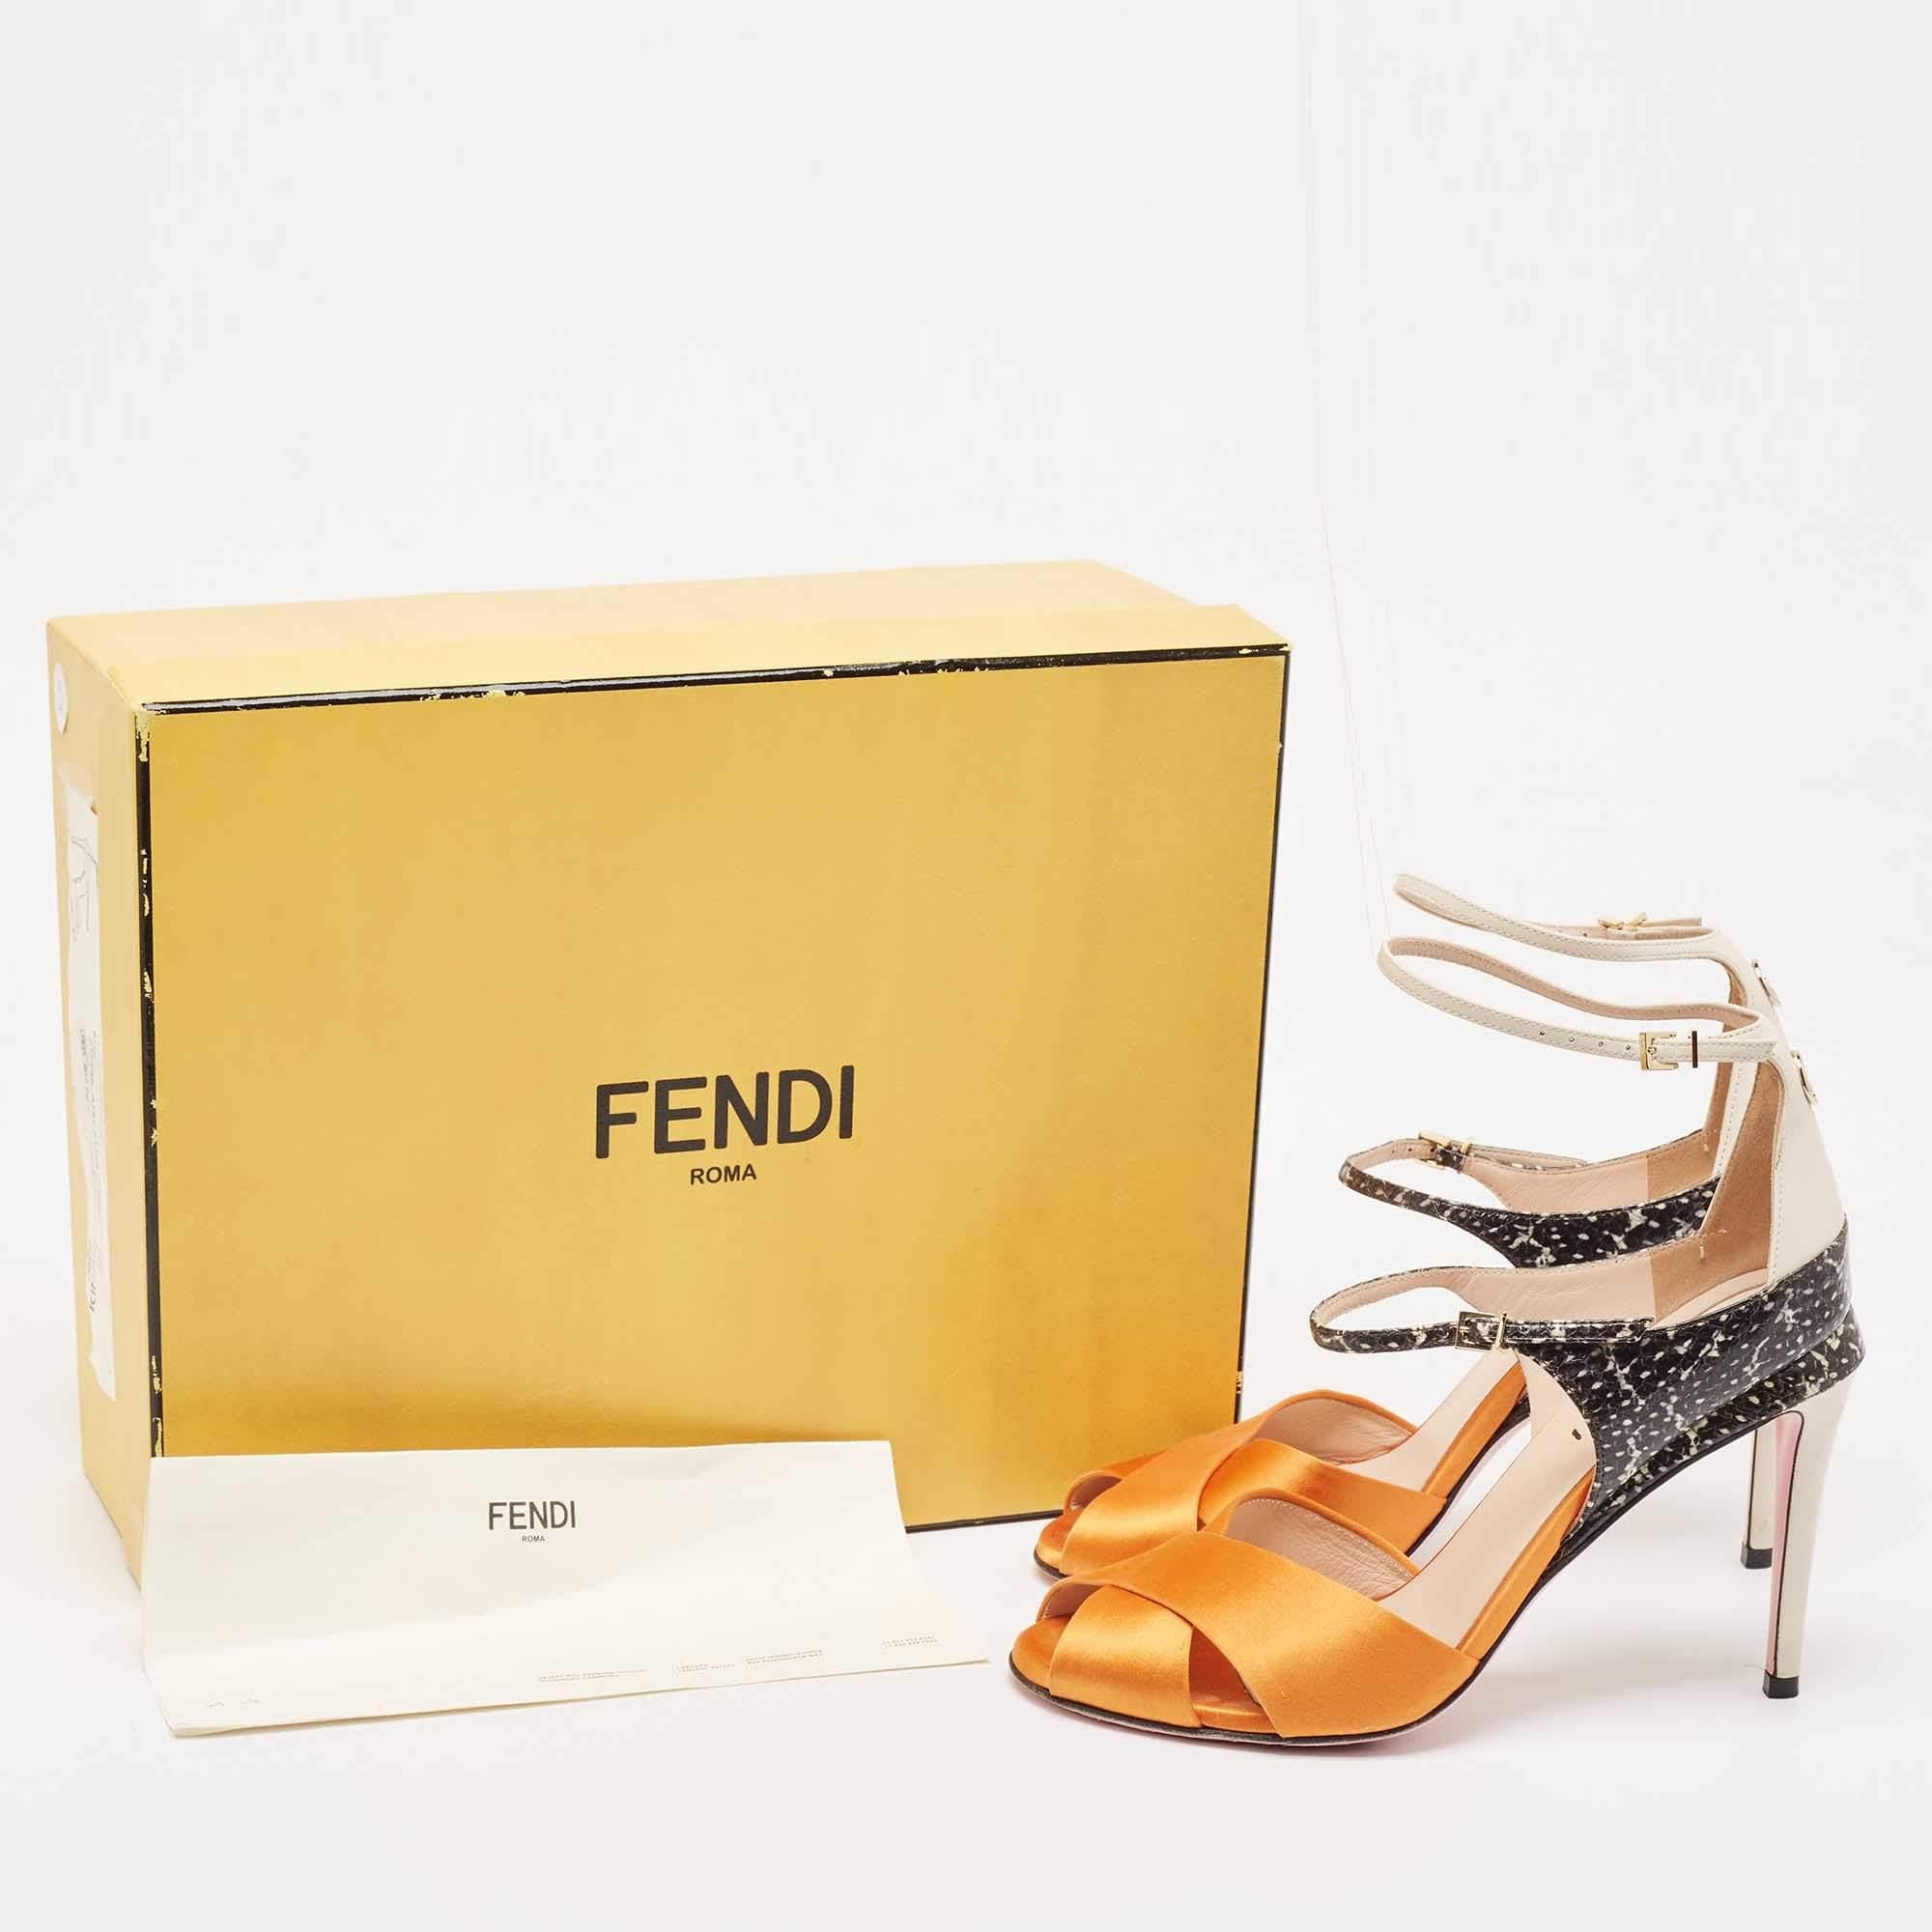 Fendi Satin And Python Embossed Leather Criss Cross Ankle Strap Sandals Size 37 4